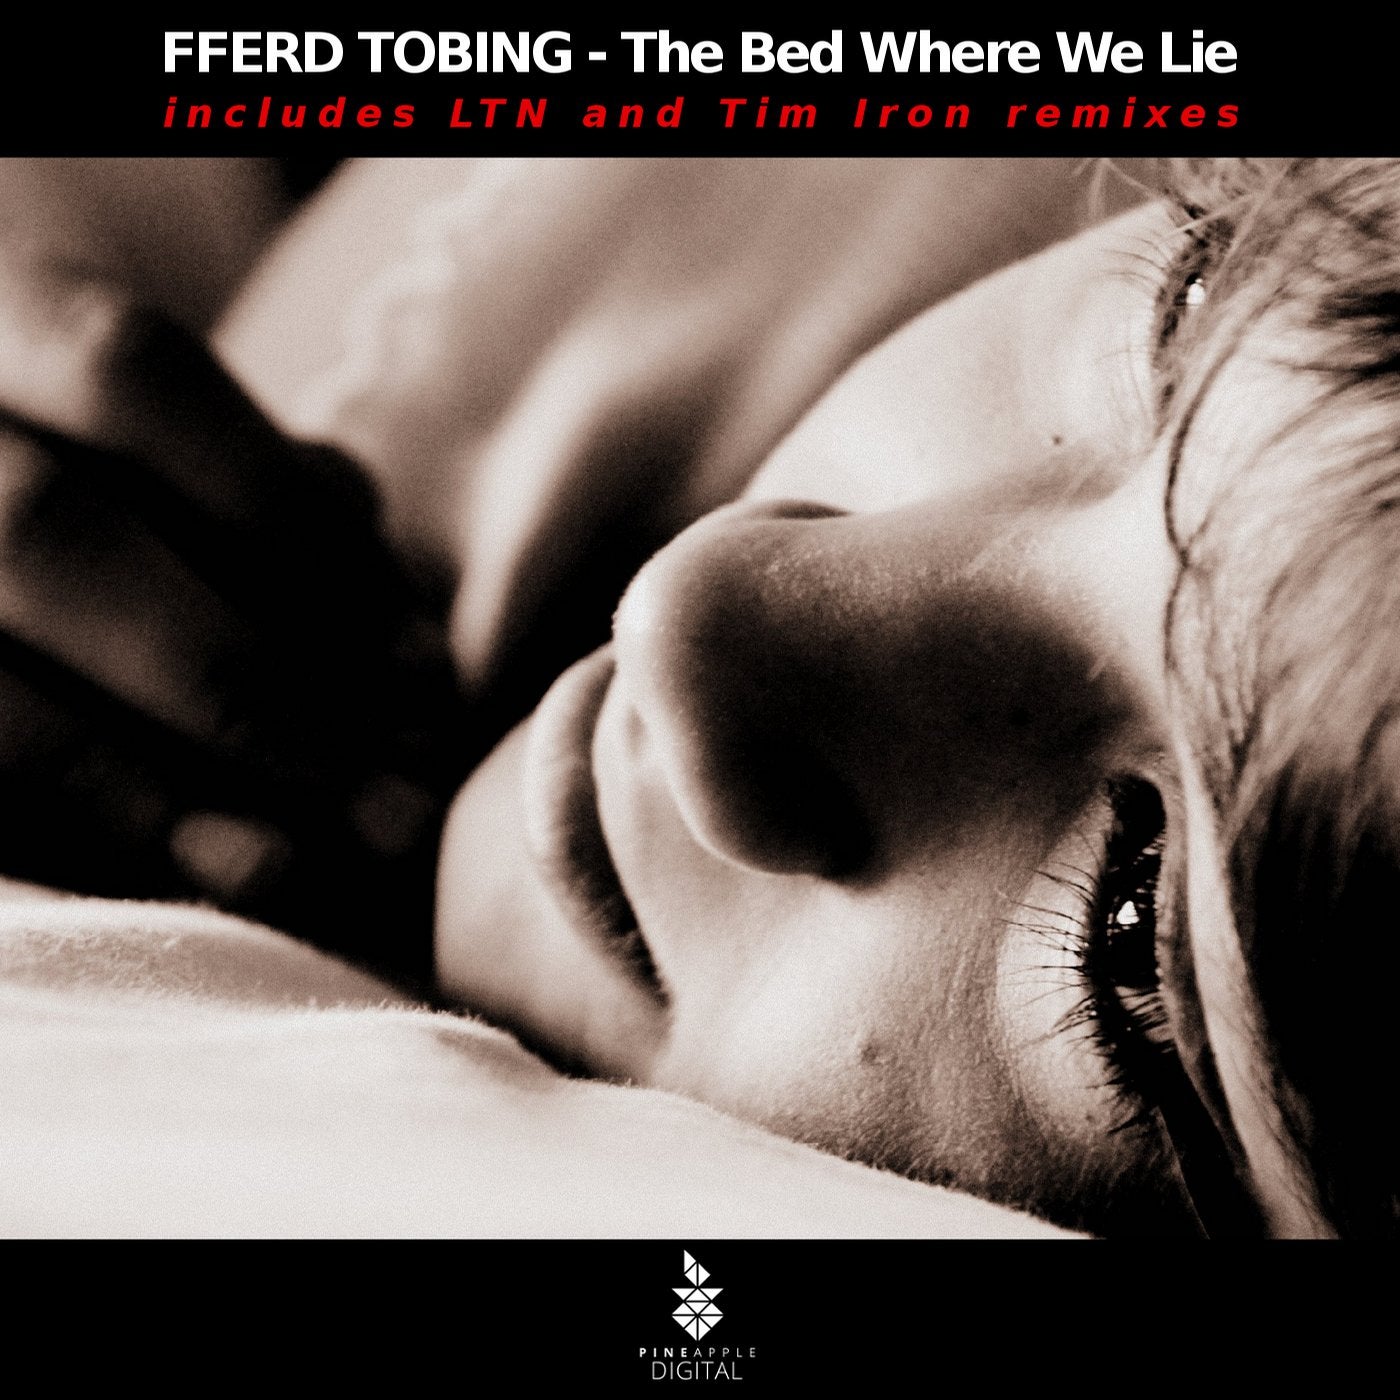 The Bed Where We Lie